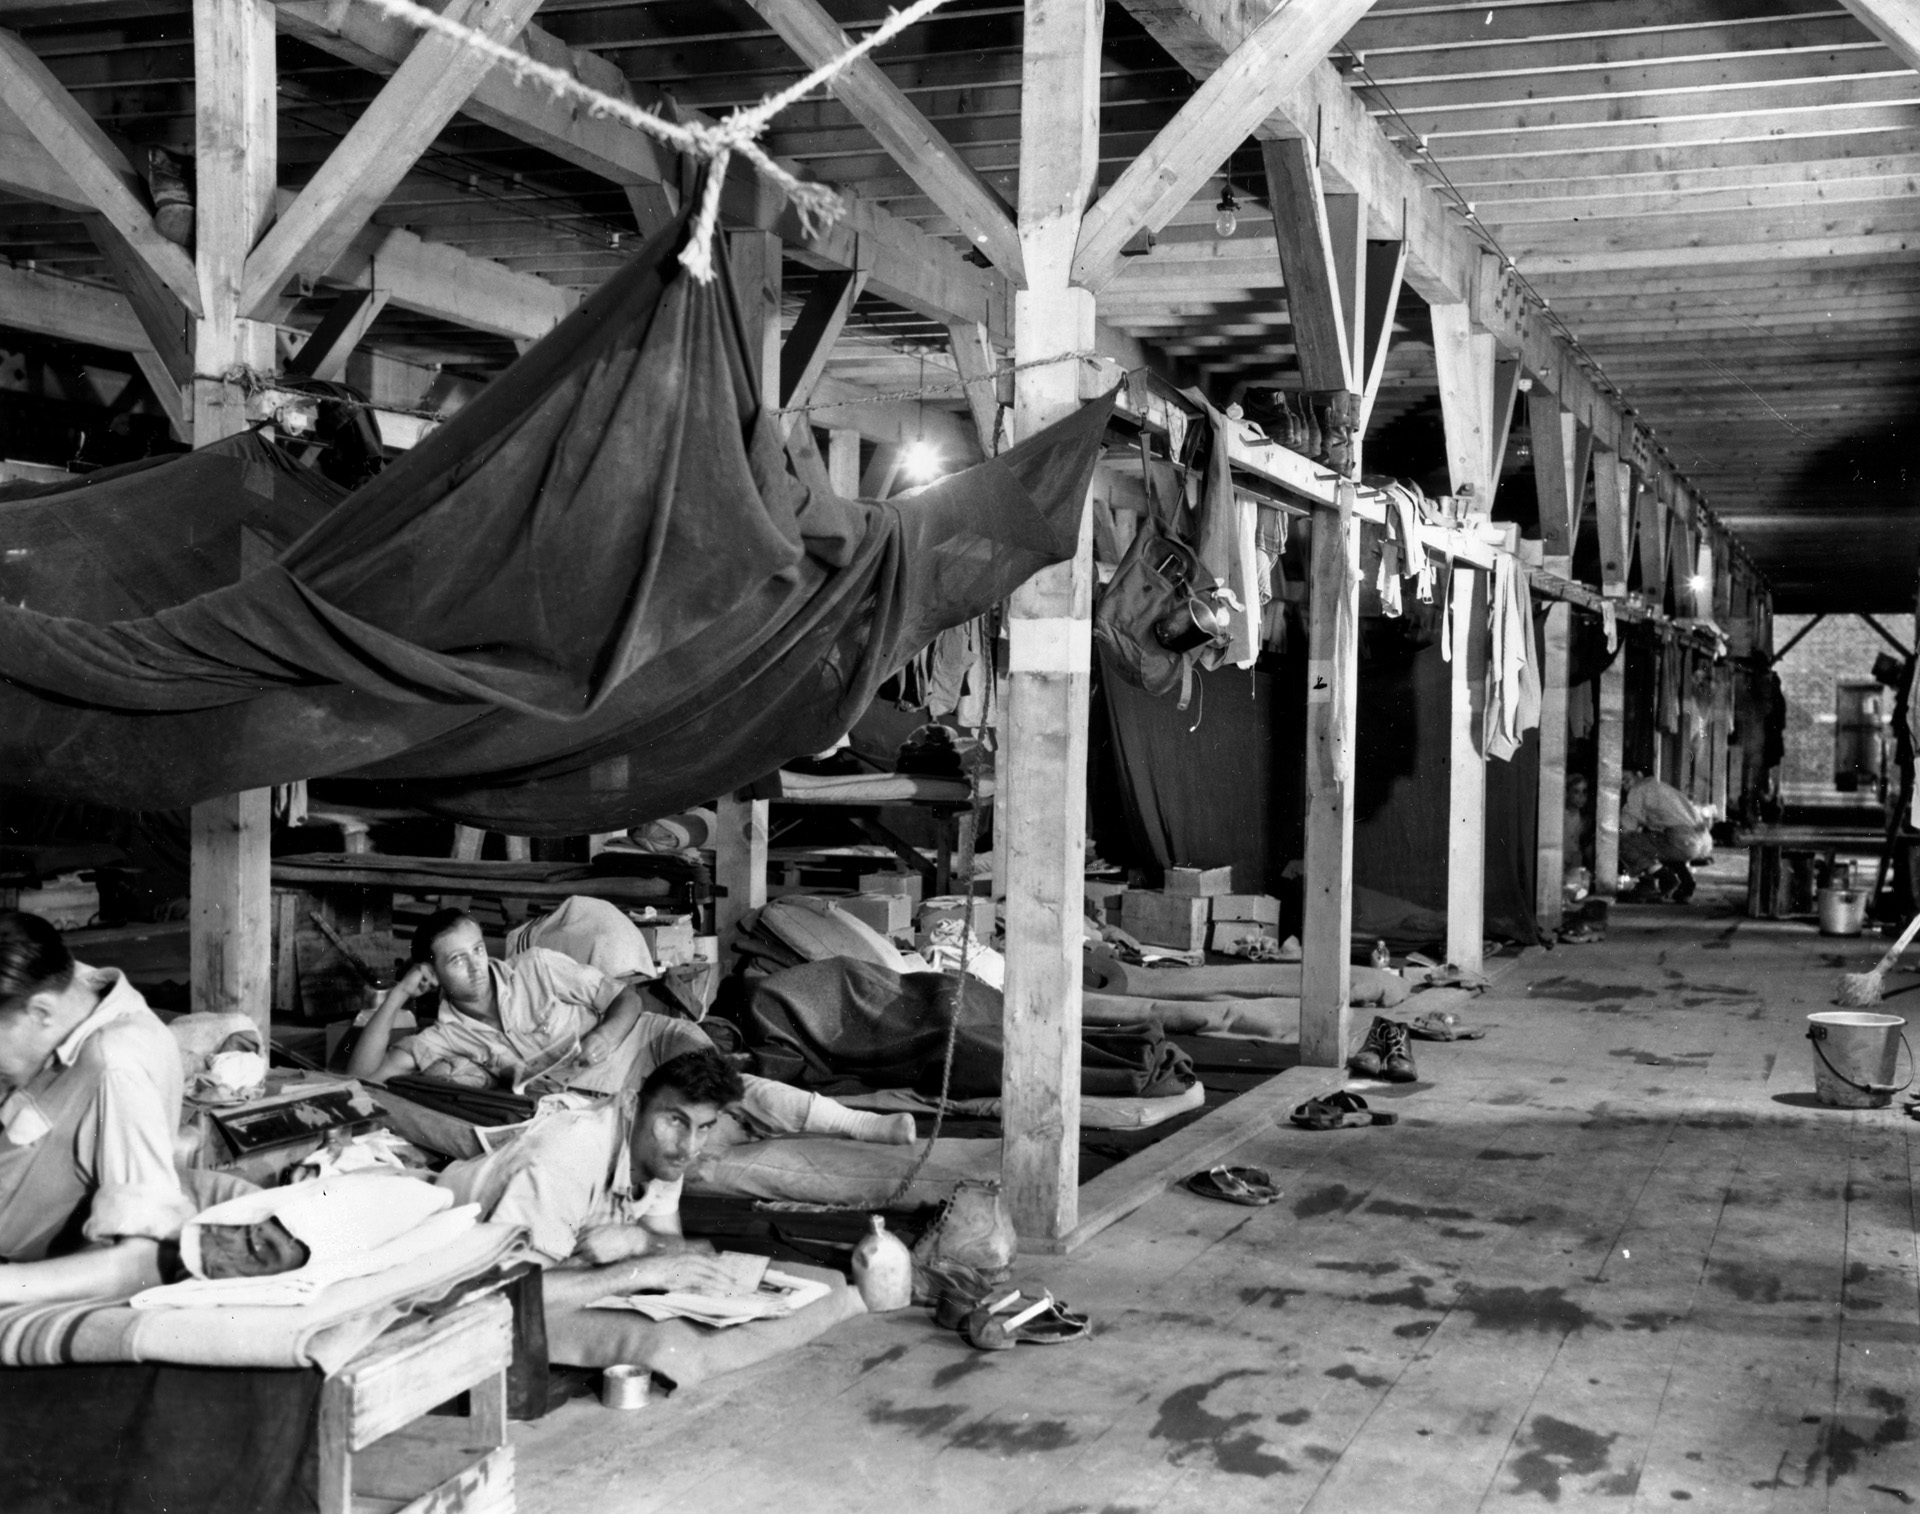 Interior of a barracks at the Mukten POW camp, where Americans like Galbraith and Wainwright were held. 